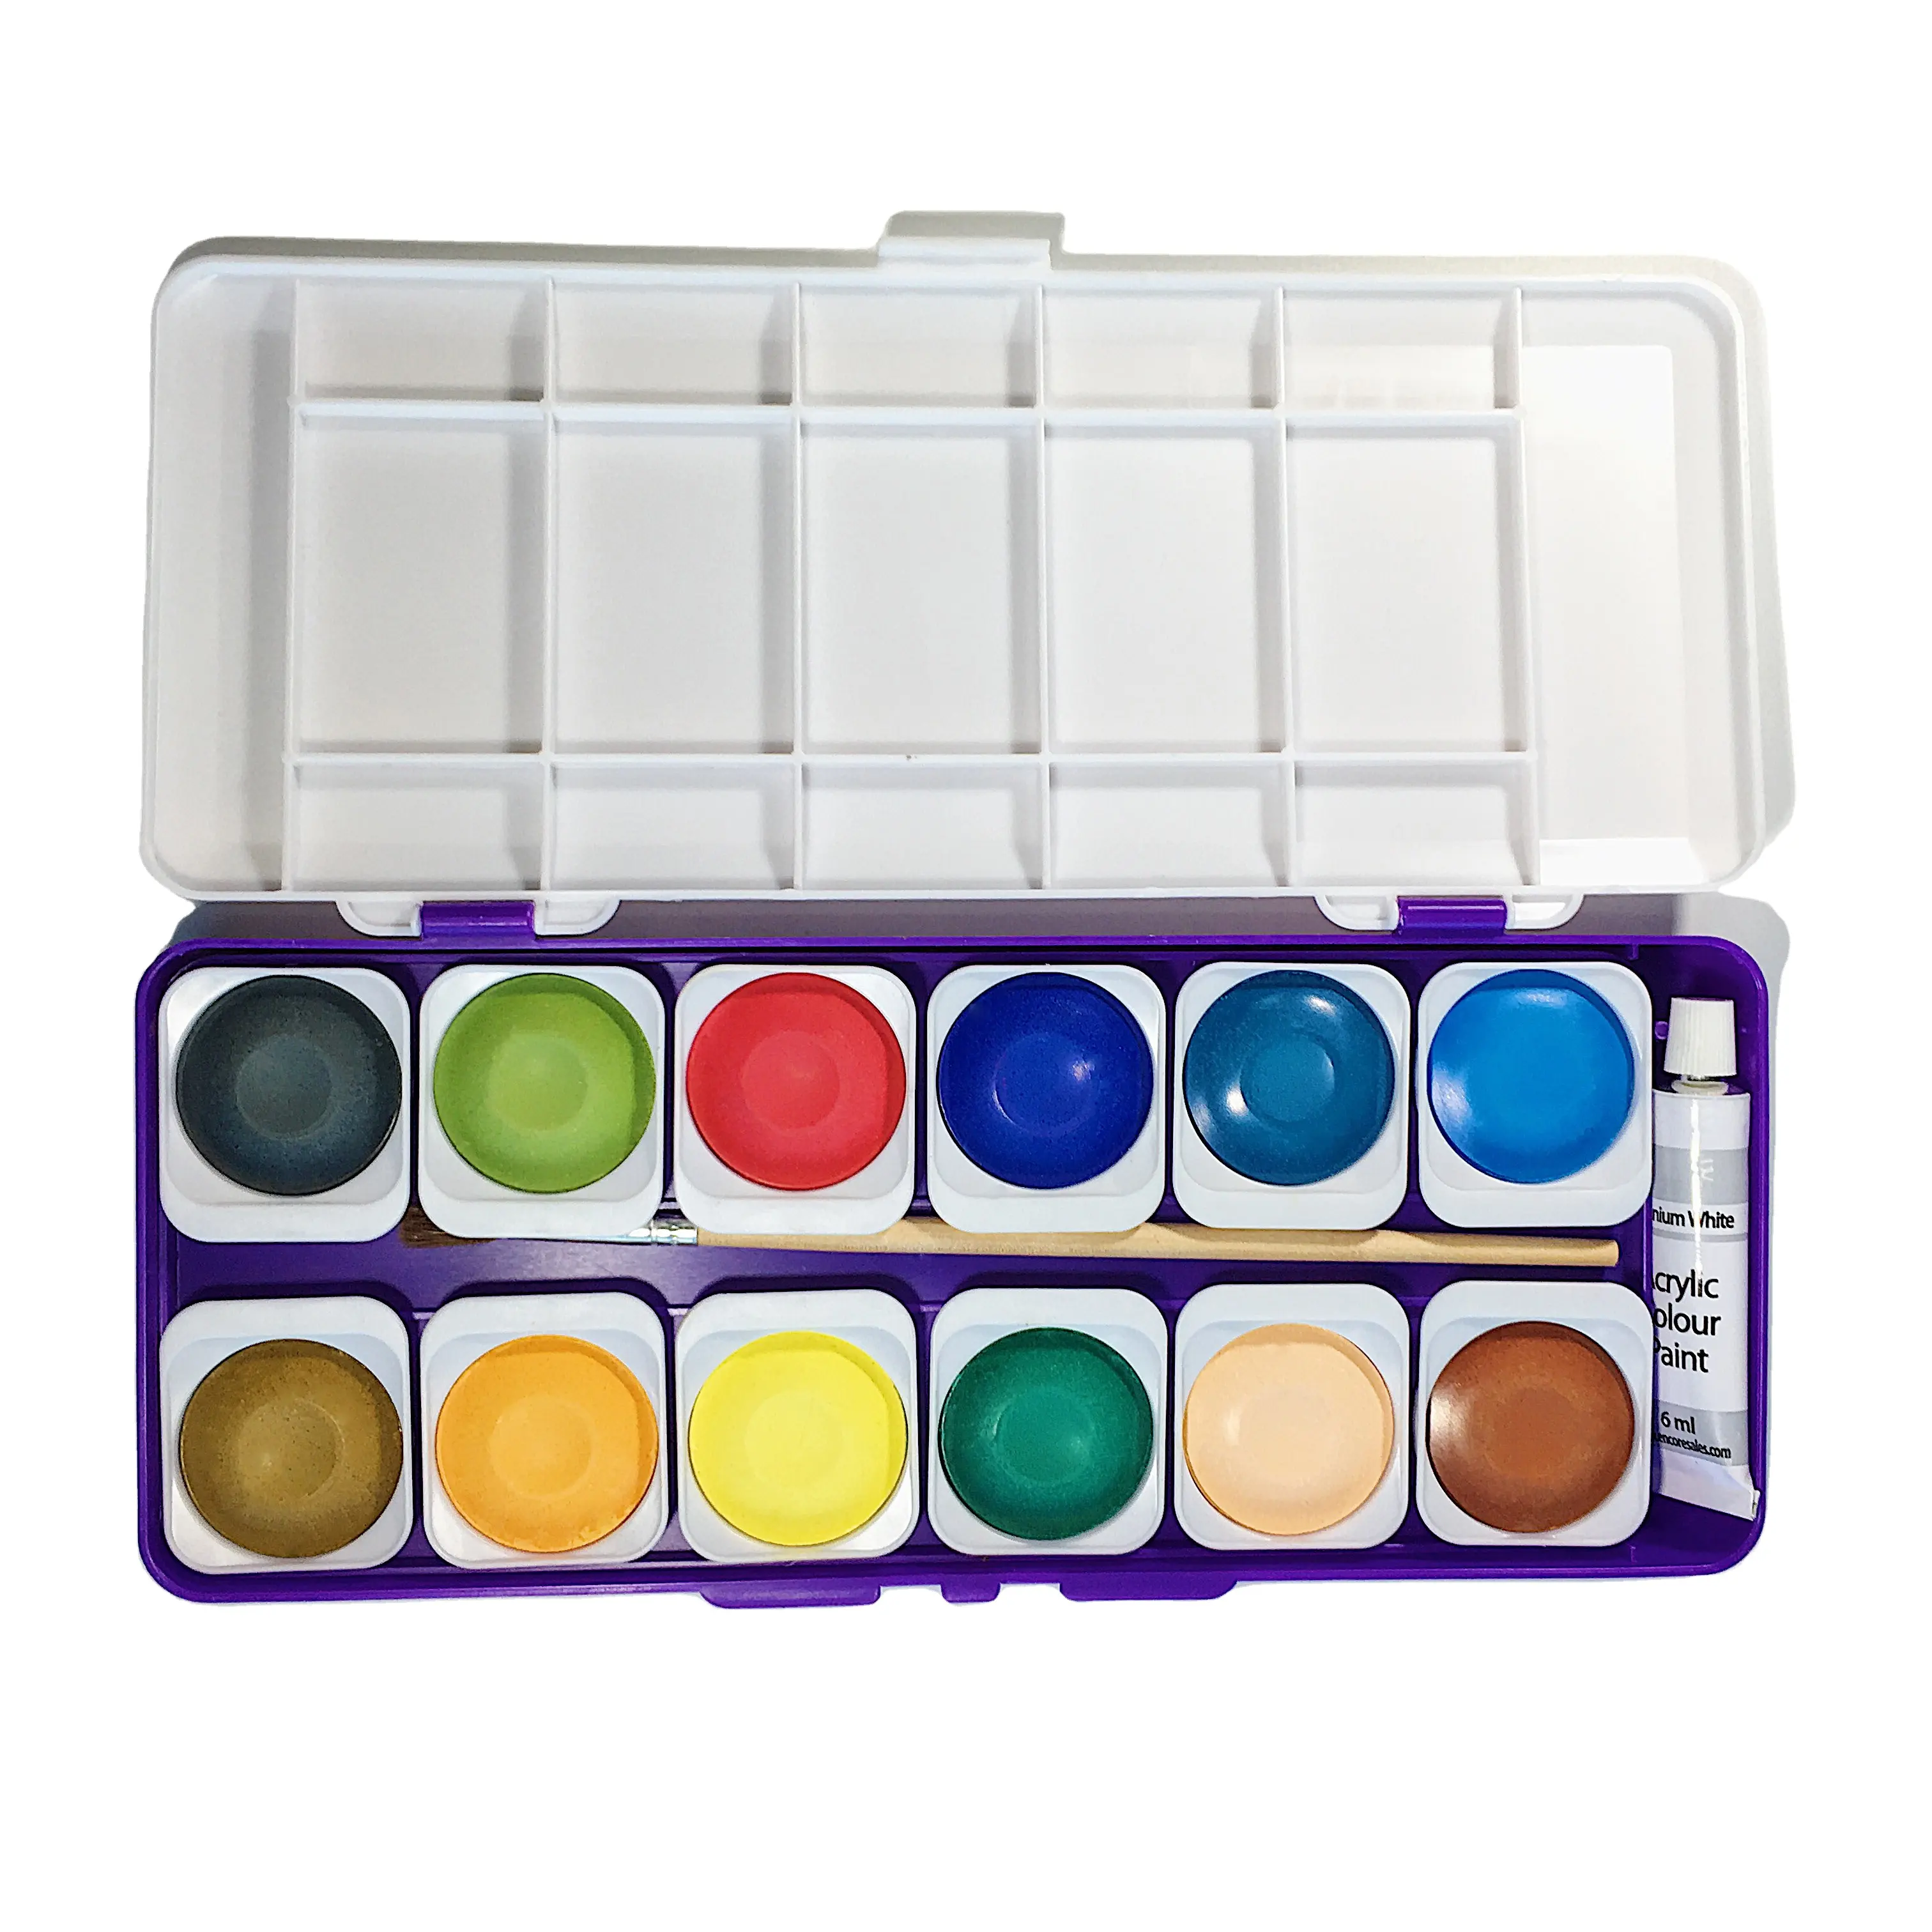 Kunguang Solid Cake Watercolor Paint Set Delivers Paint Brushes Plastic Box Package